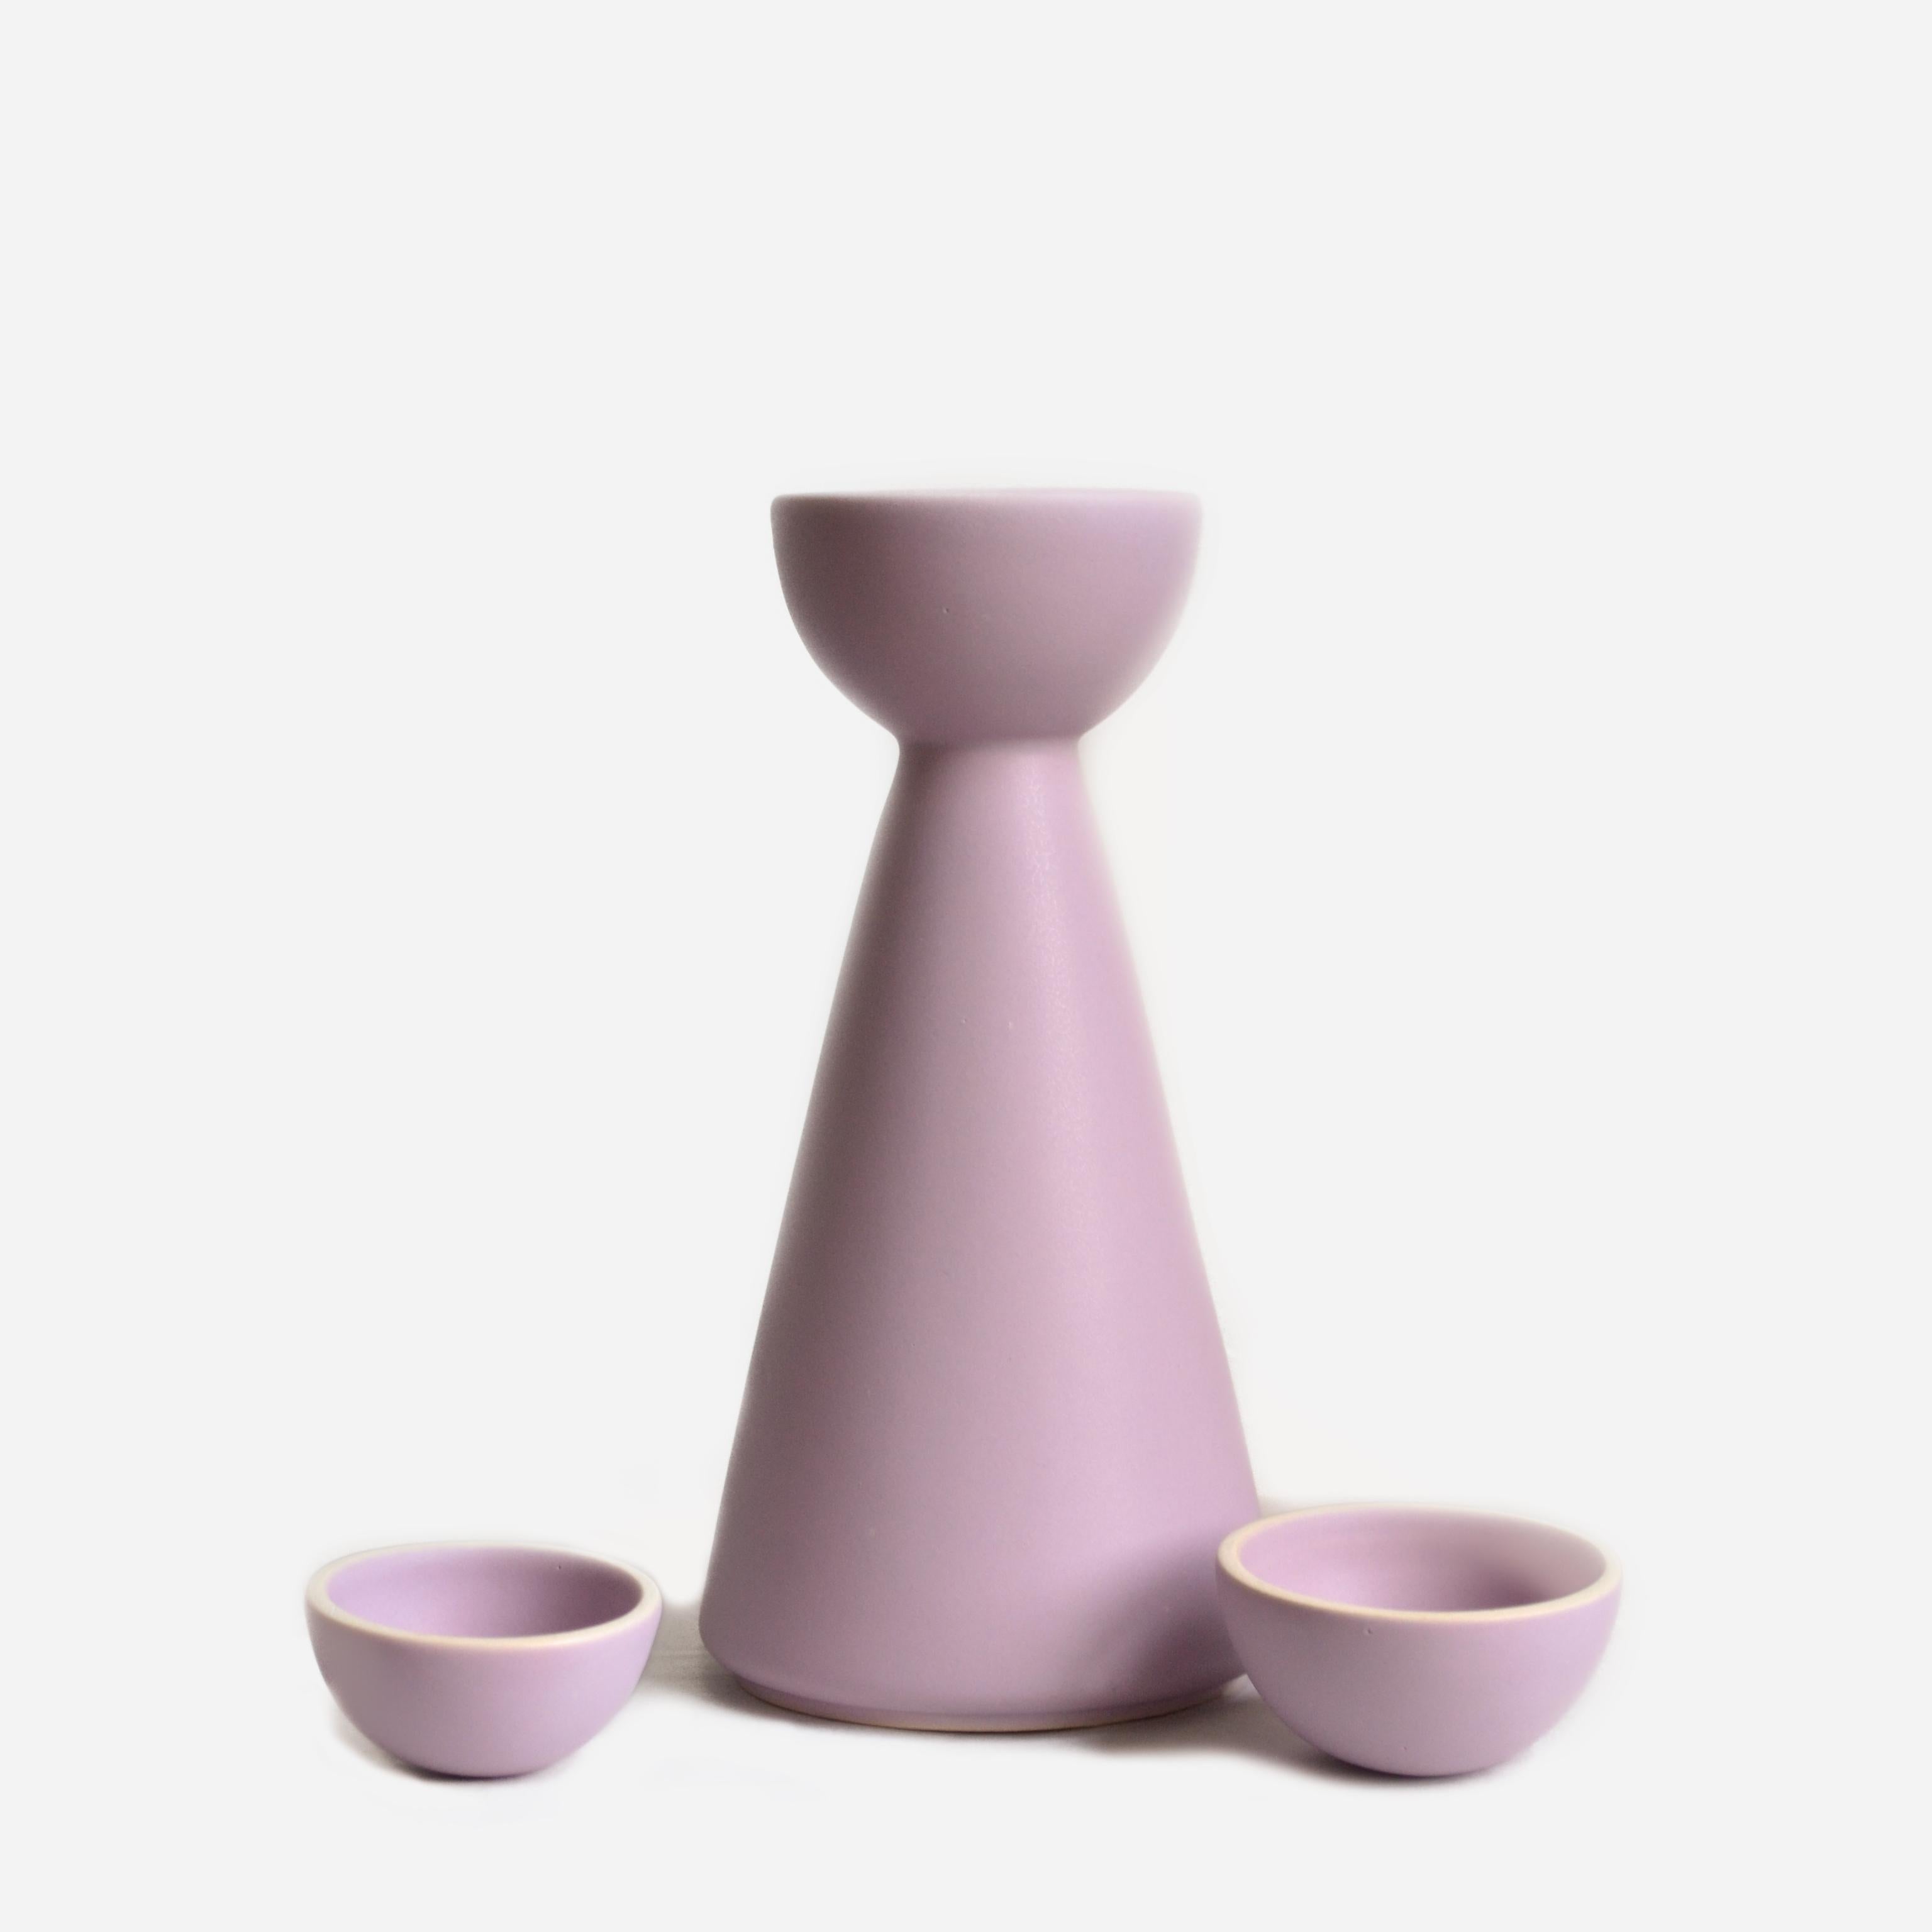 Contemporary Carafe and cups, Tequila bottle. Mezcal bottle and cups. Lavanda Ceramic. For Sale